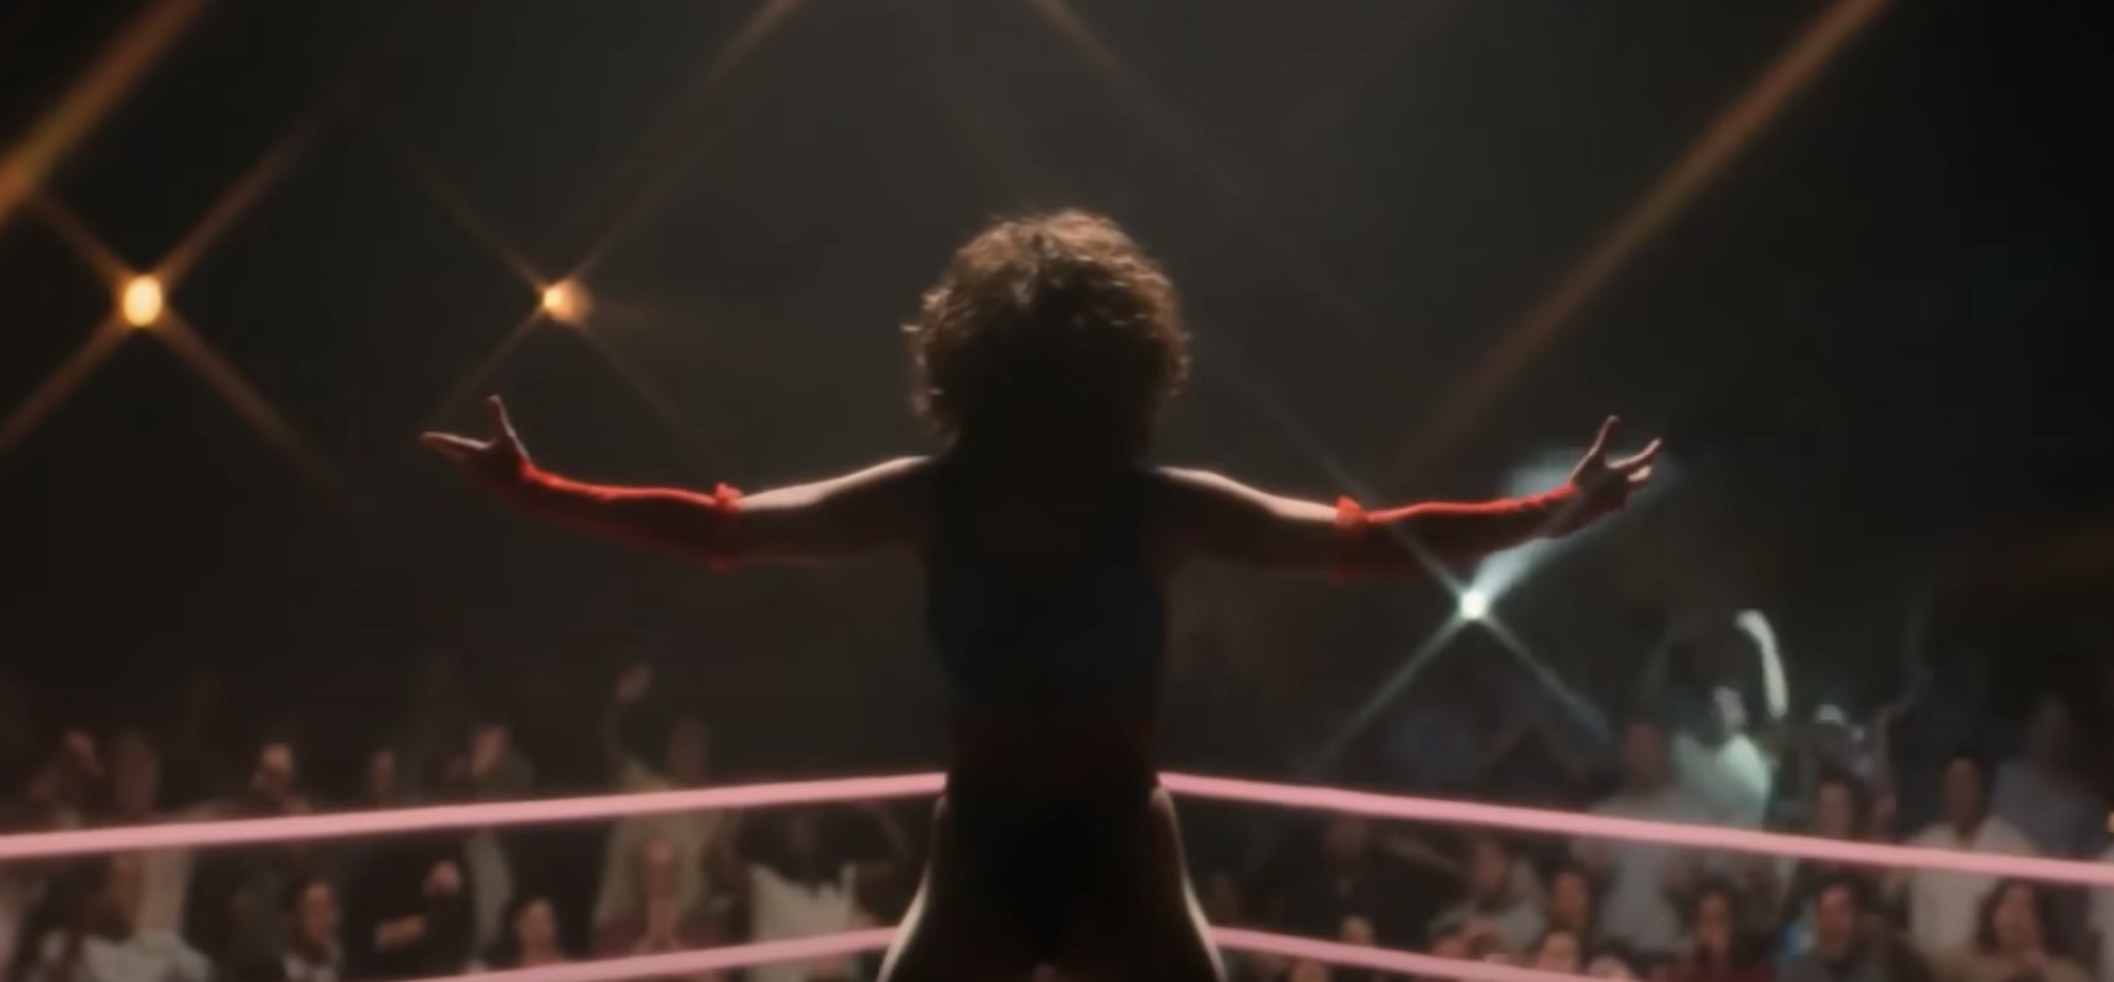 A female wrestler stands in the ring with her arms spread wide toward the crowd in a scene from &#x27;GLOW&#x27; on Netflix